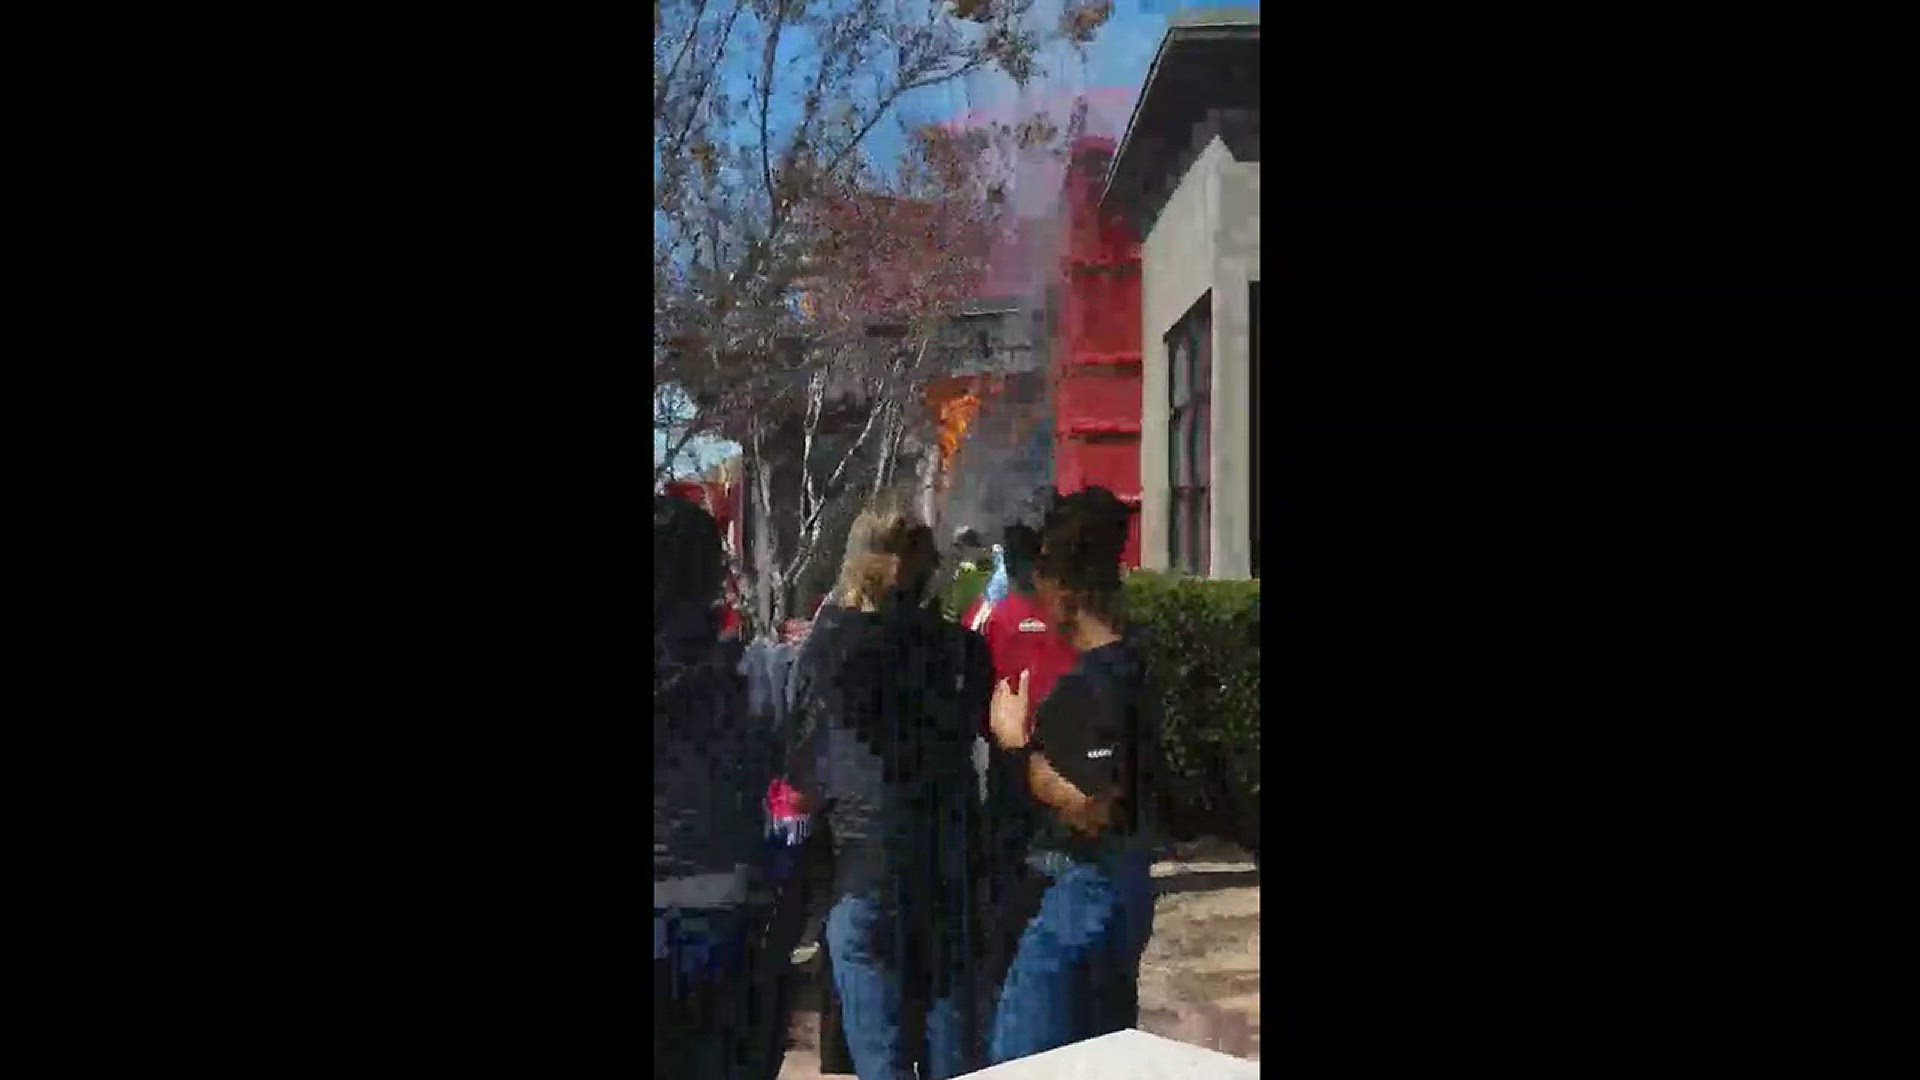 Firefighters work to extinguish a fire at a Red Robin restaurant in Newport News on Sunday, March 18 2018. Video courtesy Payton McClain